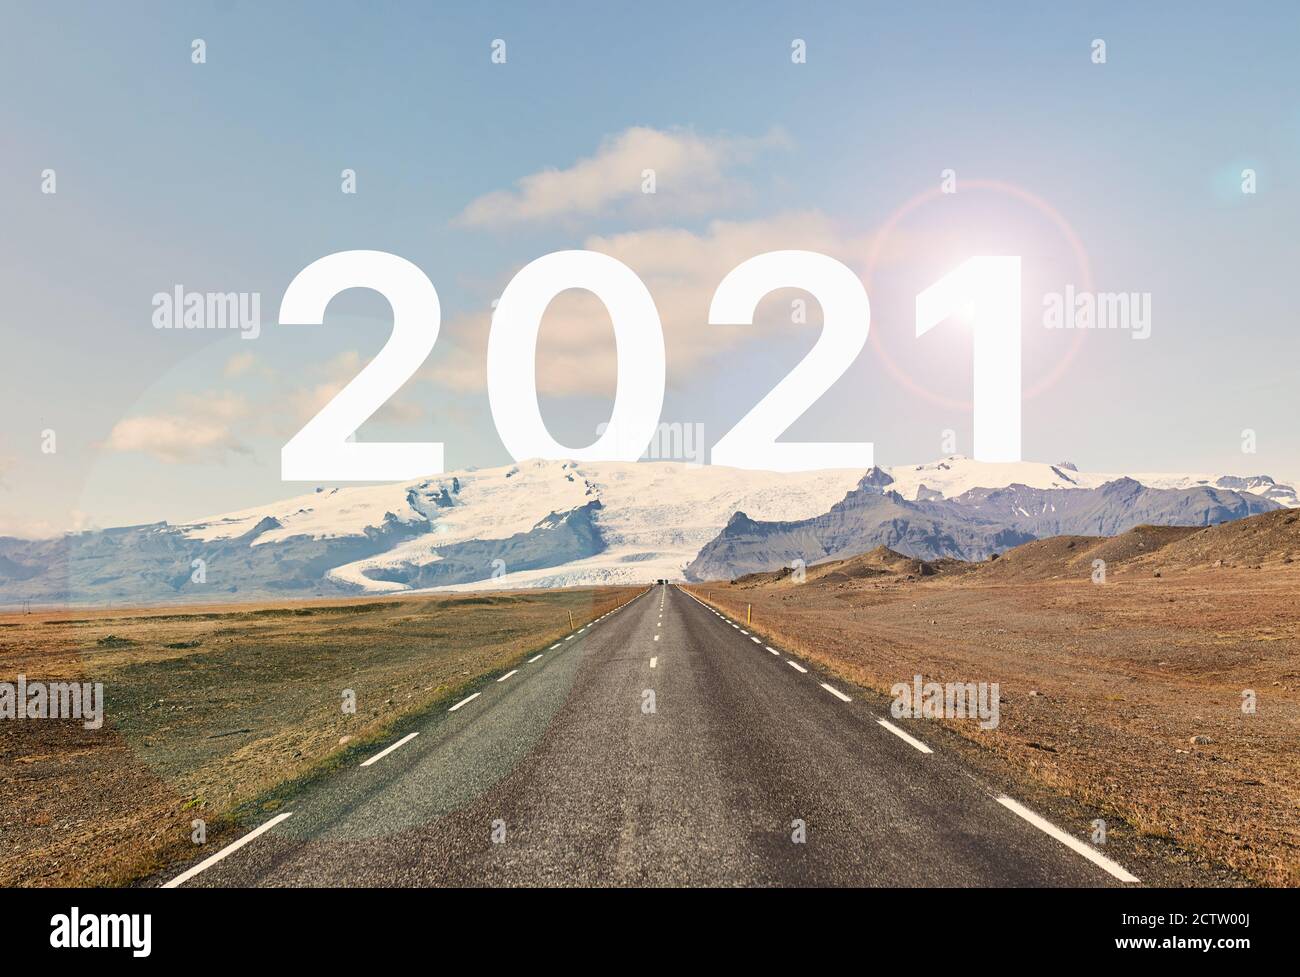 The word 2021 is written behind a glacier and an empty asphalt road against a golden sunset and beautiful blue sky.  Stock Photo